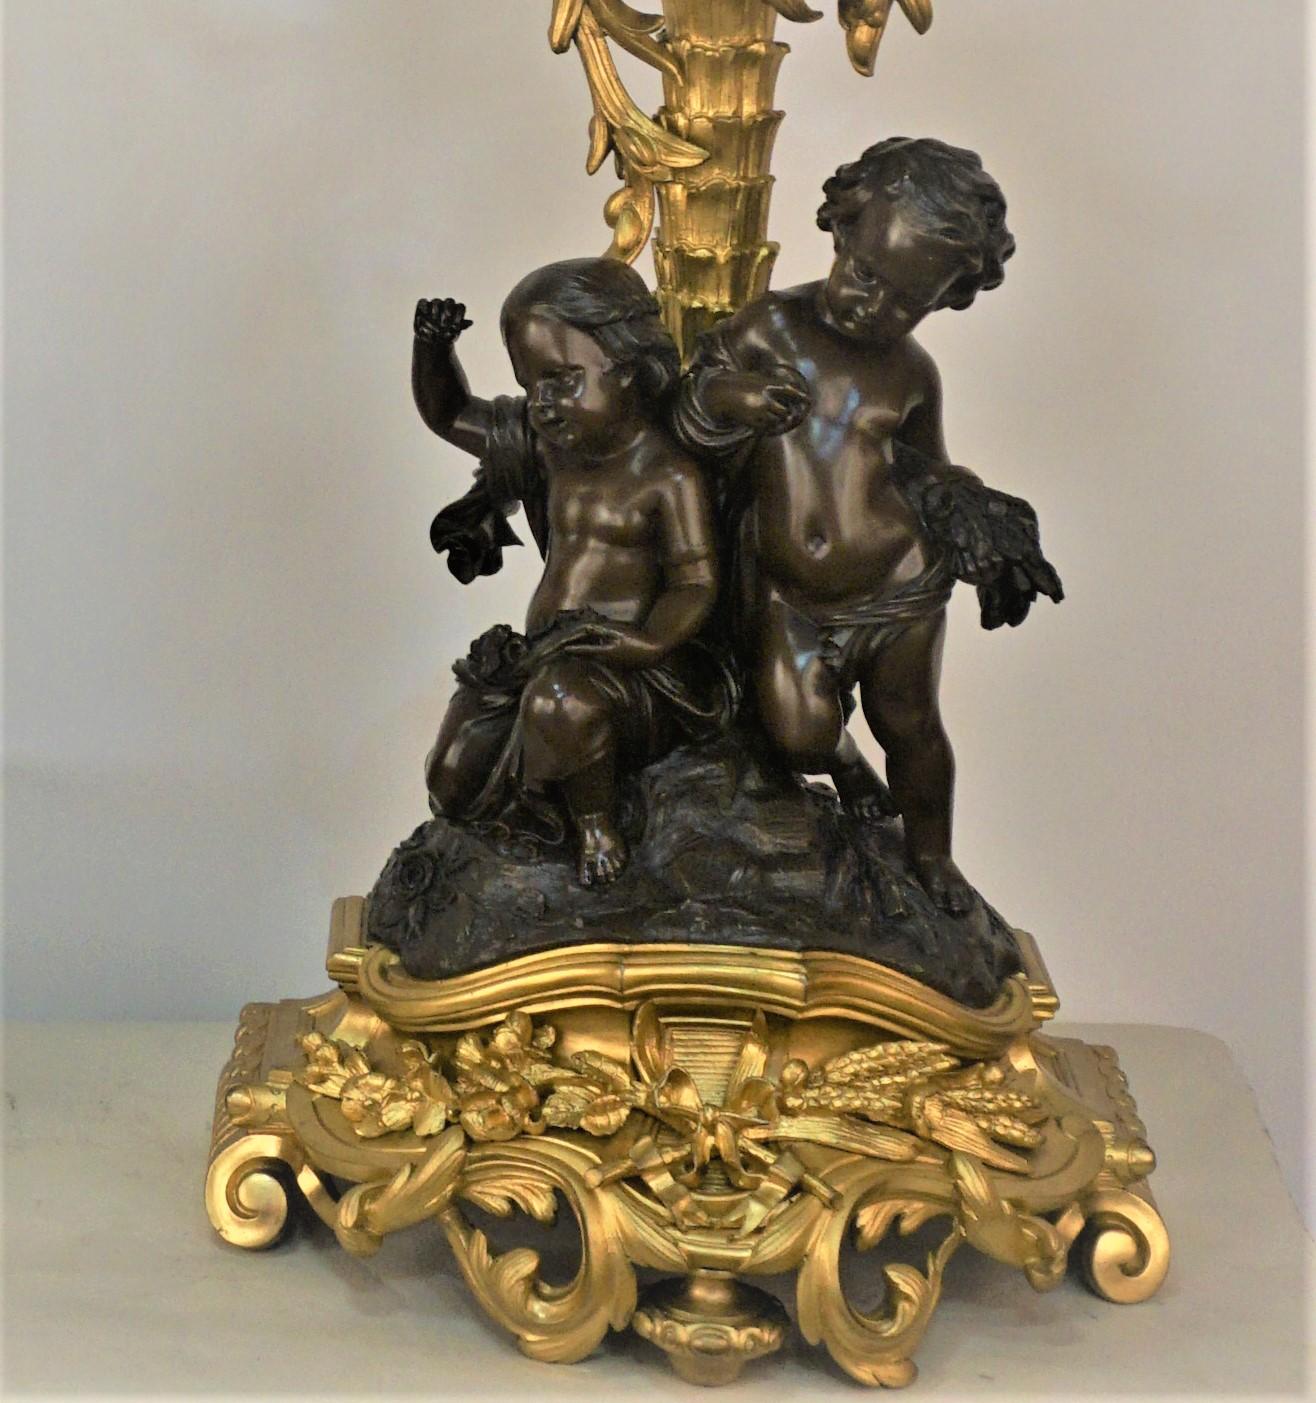 Gilt Pair of French Dore and patinated bronze Candelabra by Henri Picard